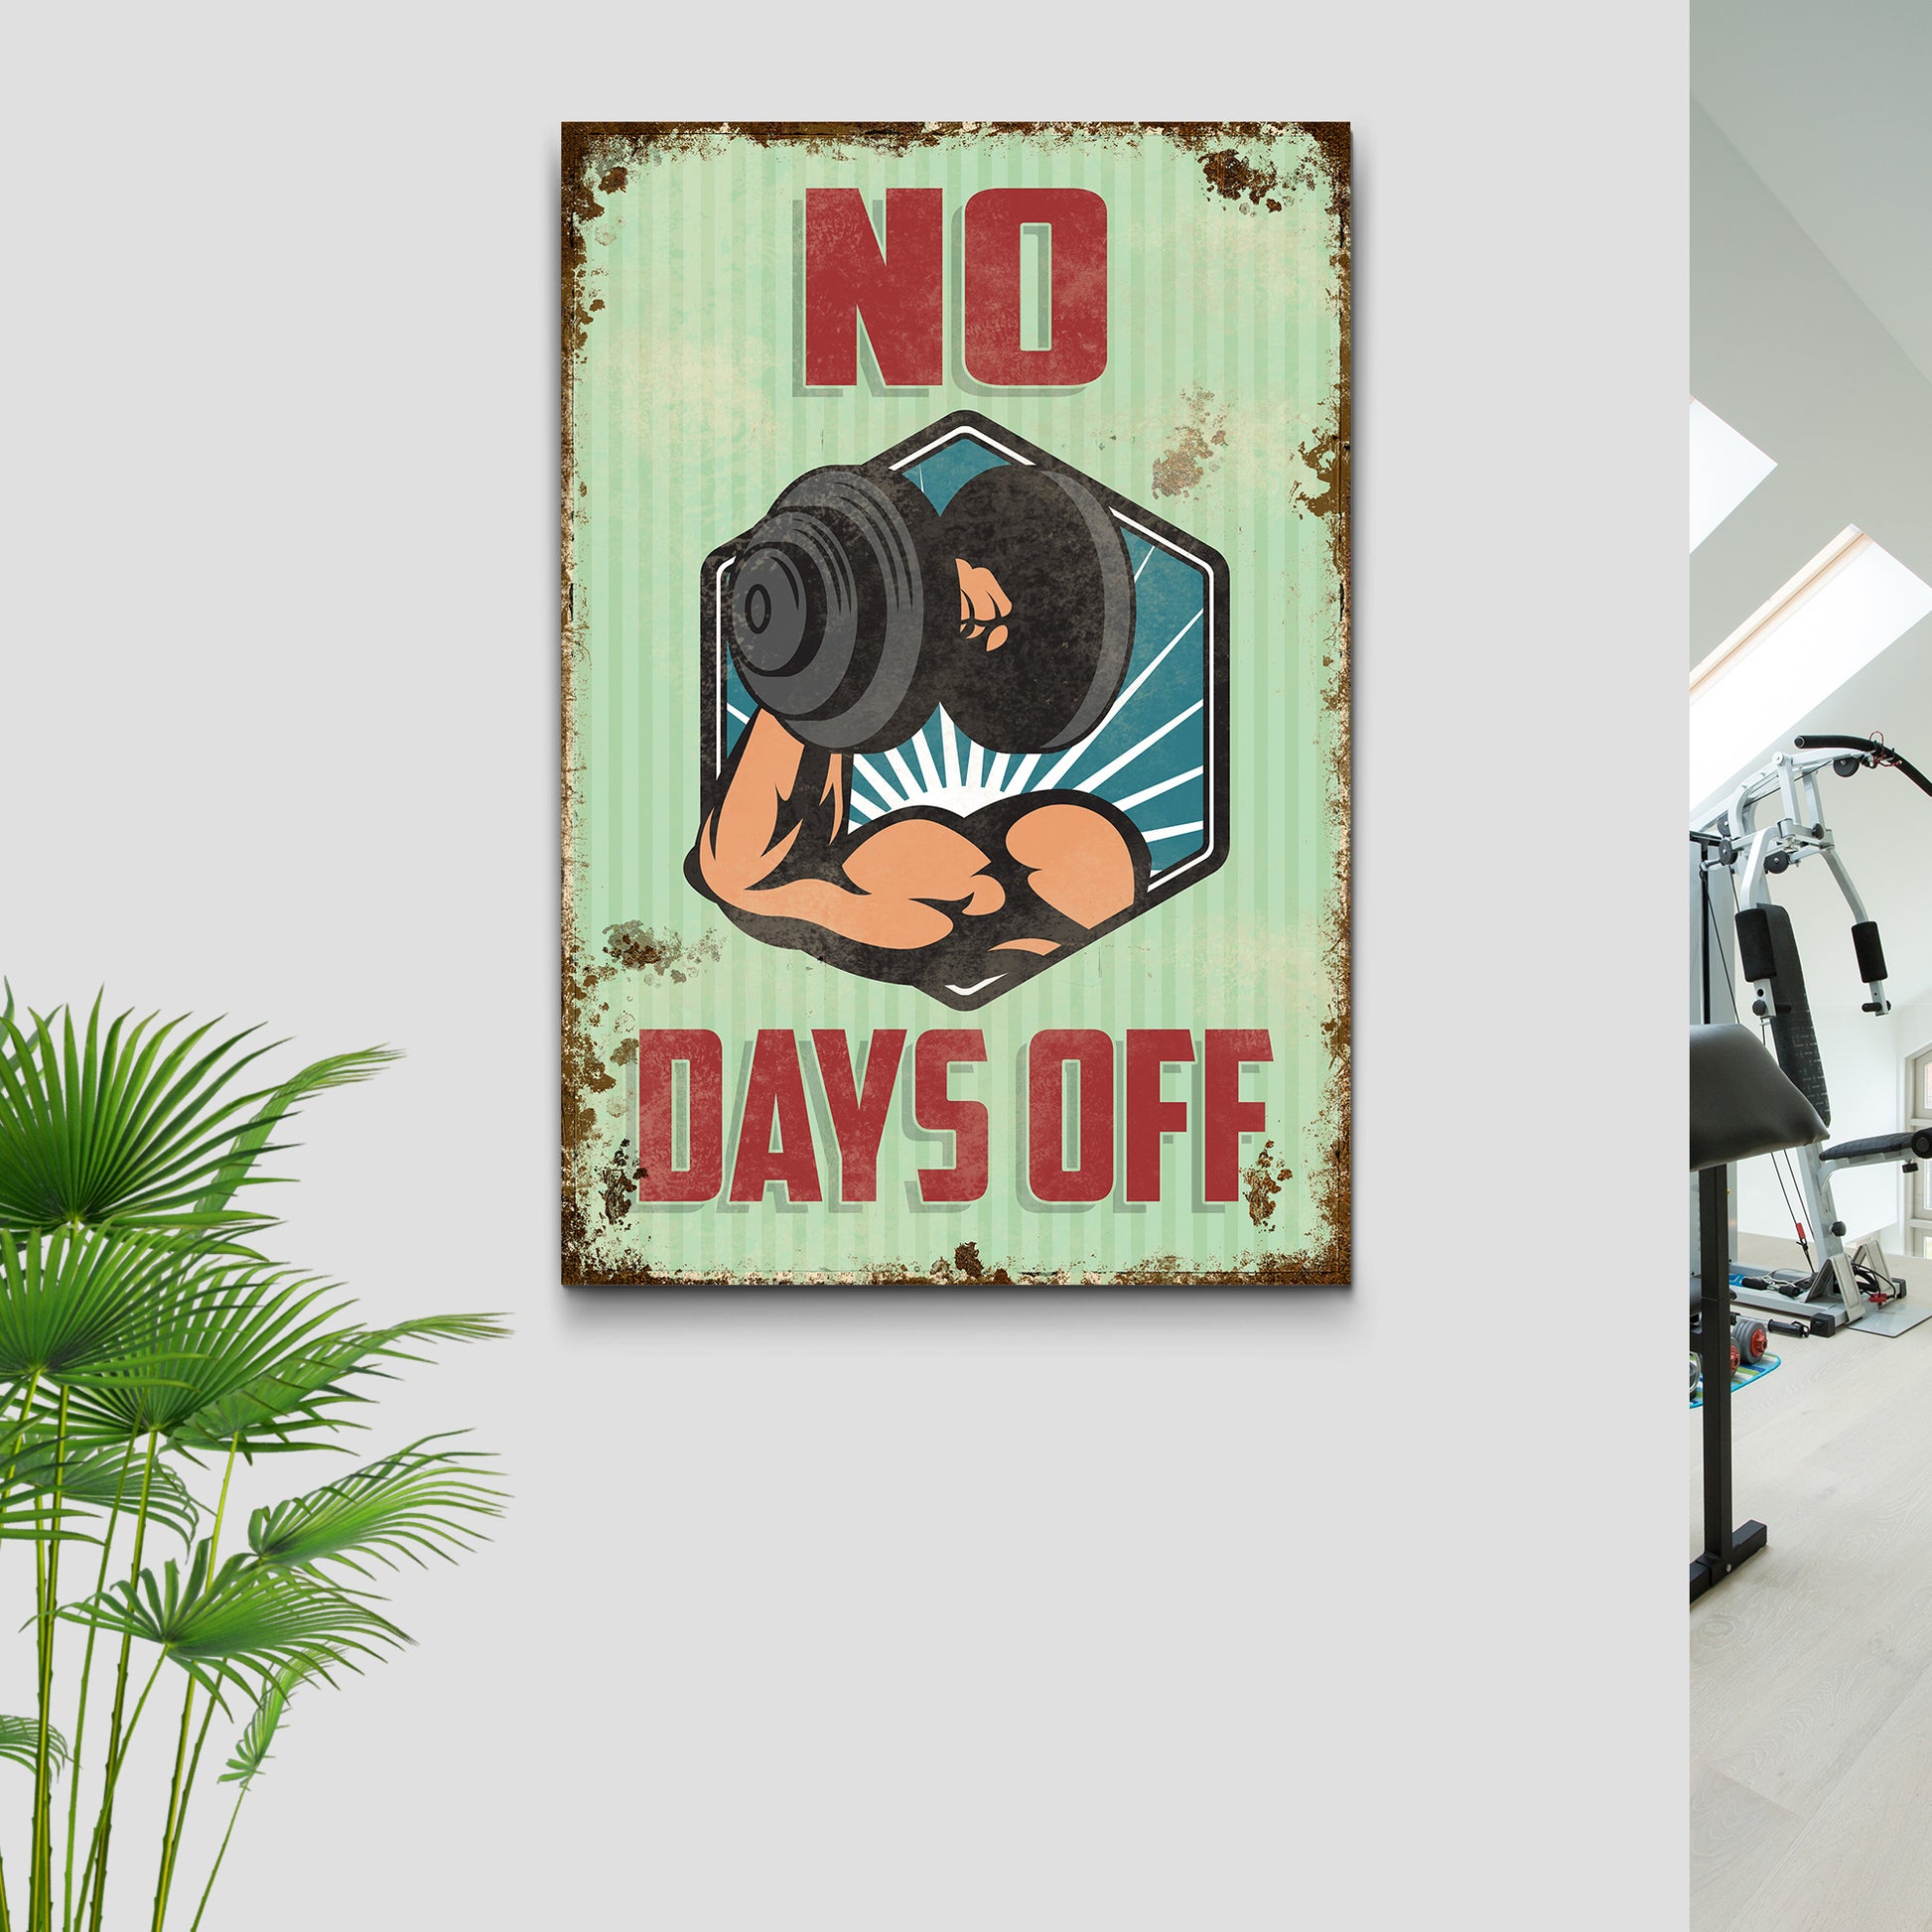 No Days Off Sign - Image by Tailored Canvases